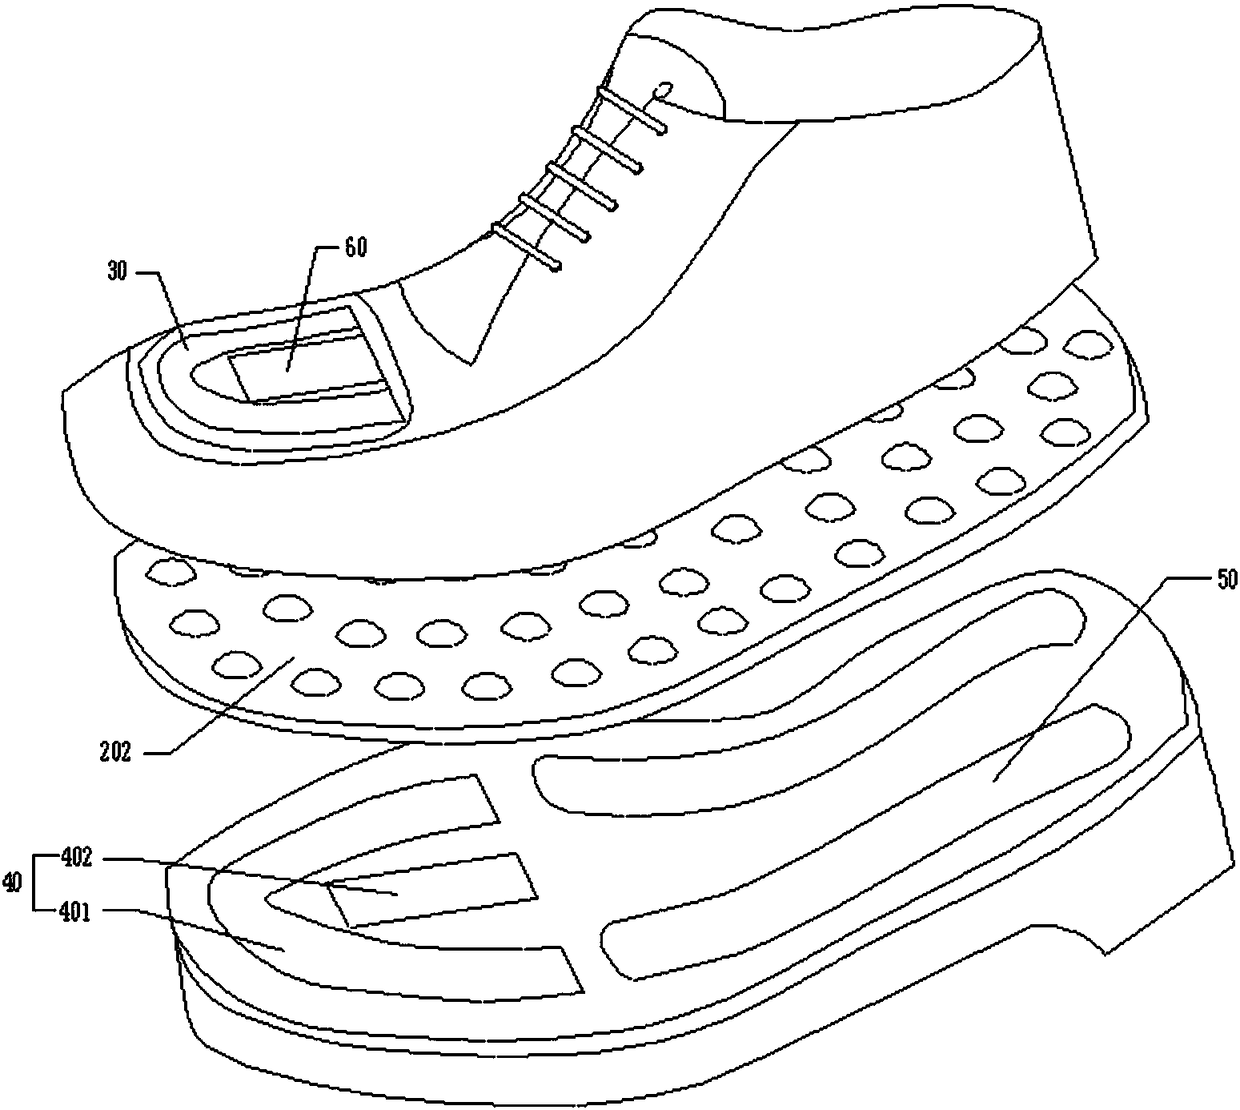 Magnet therapy shoes based on sports health of rehabilitation patient